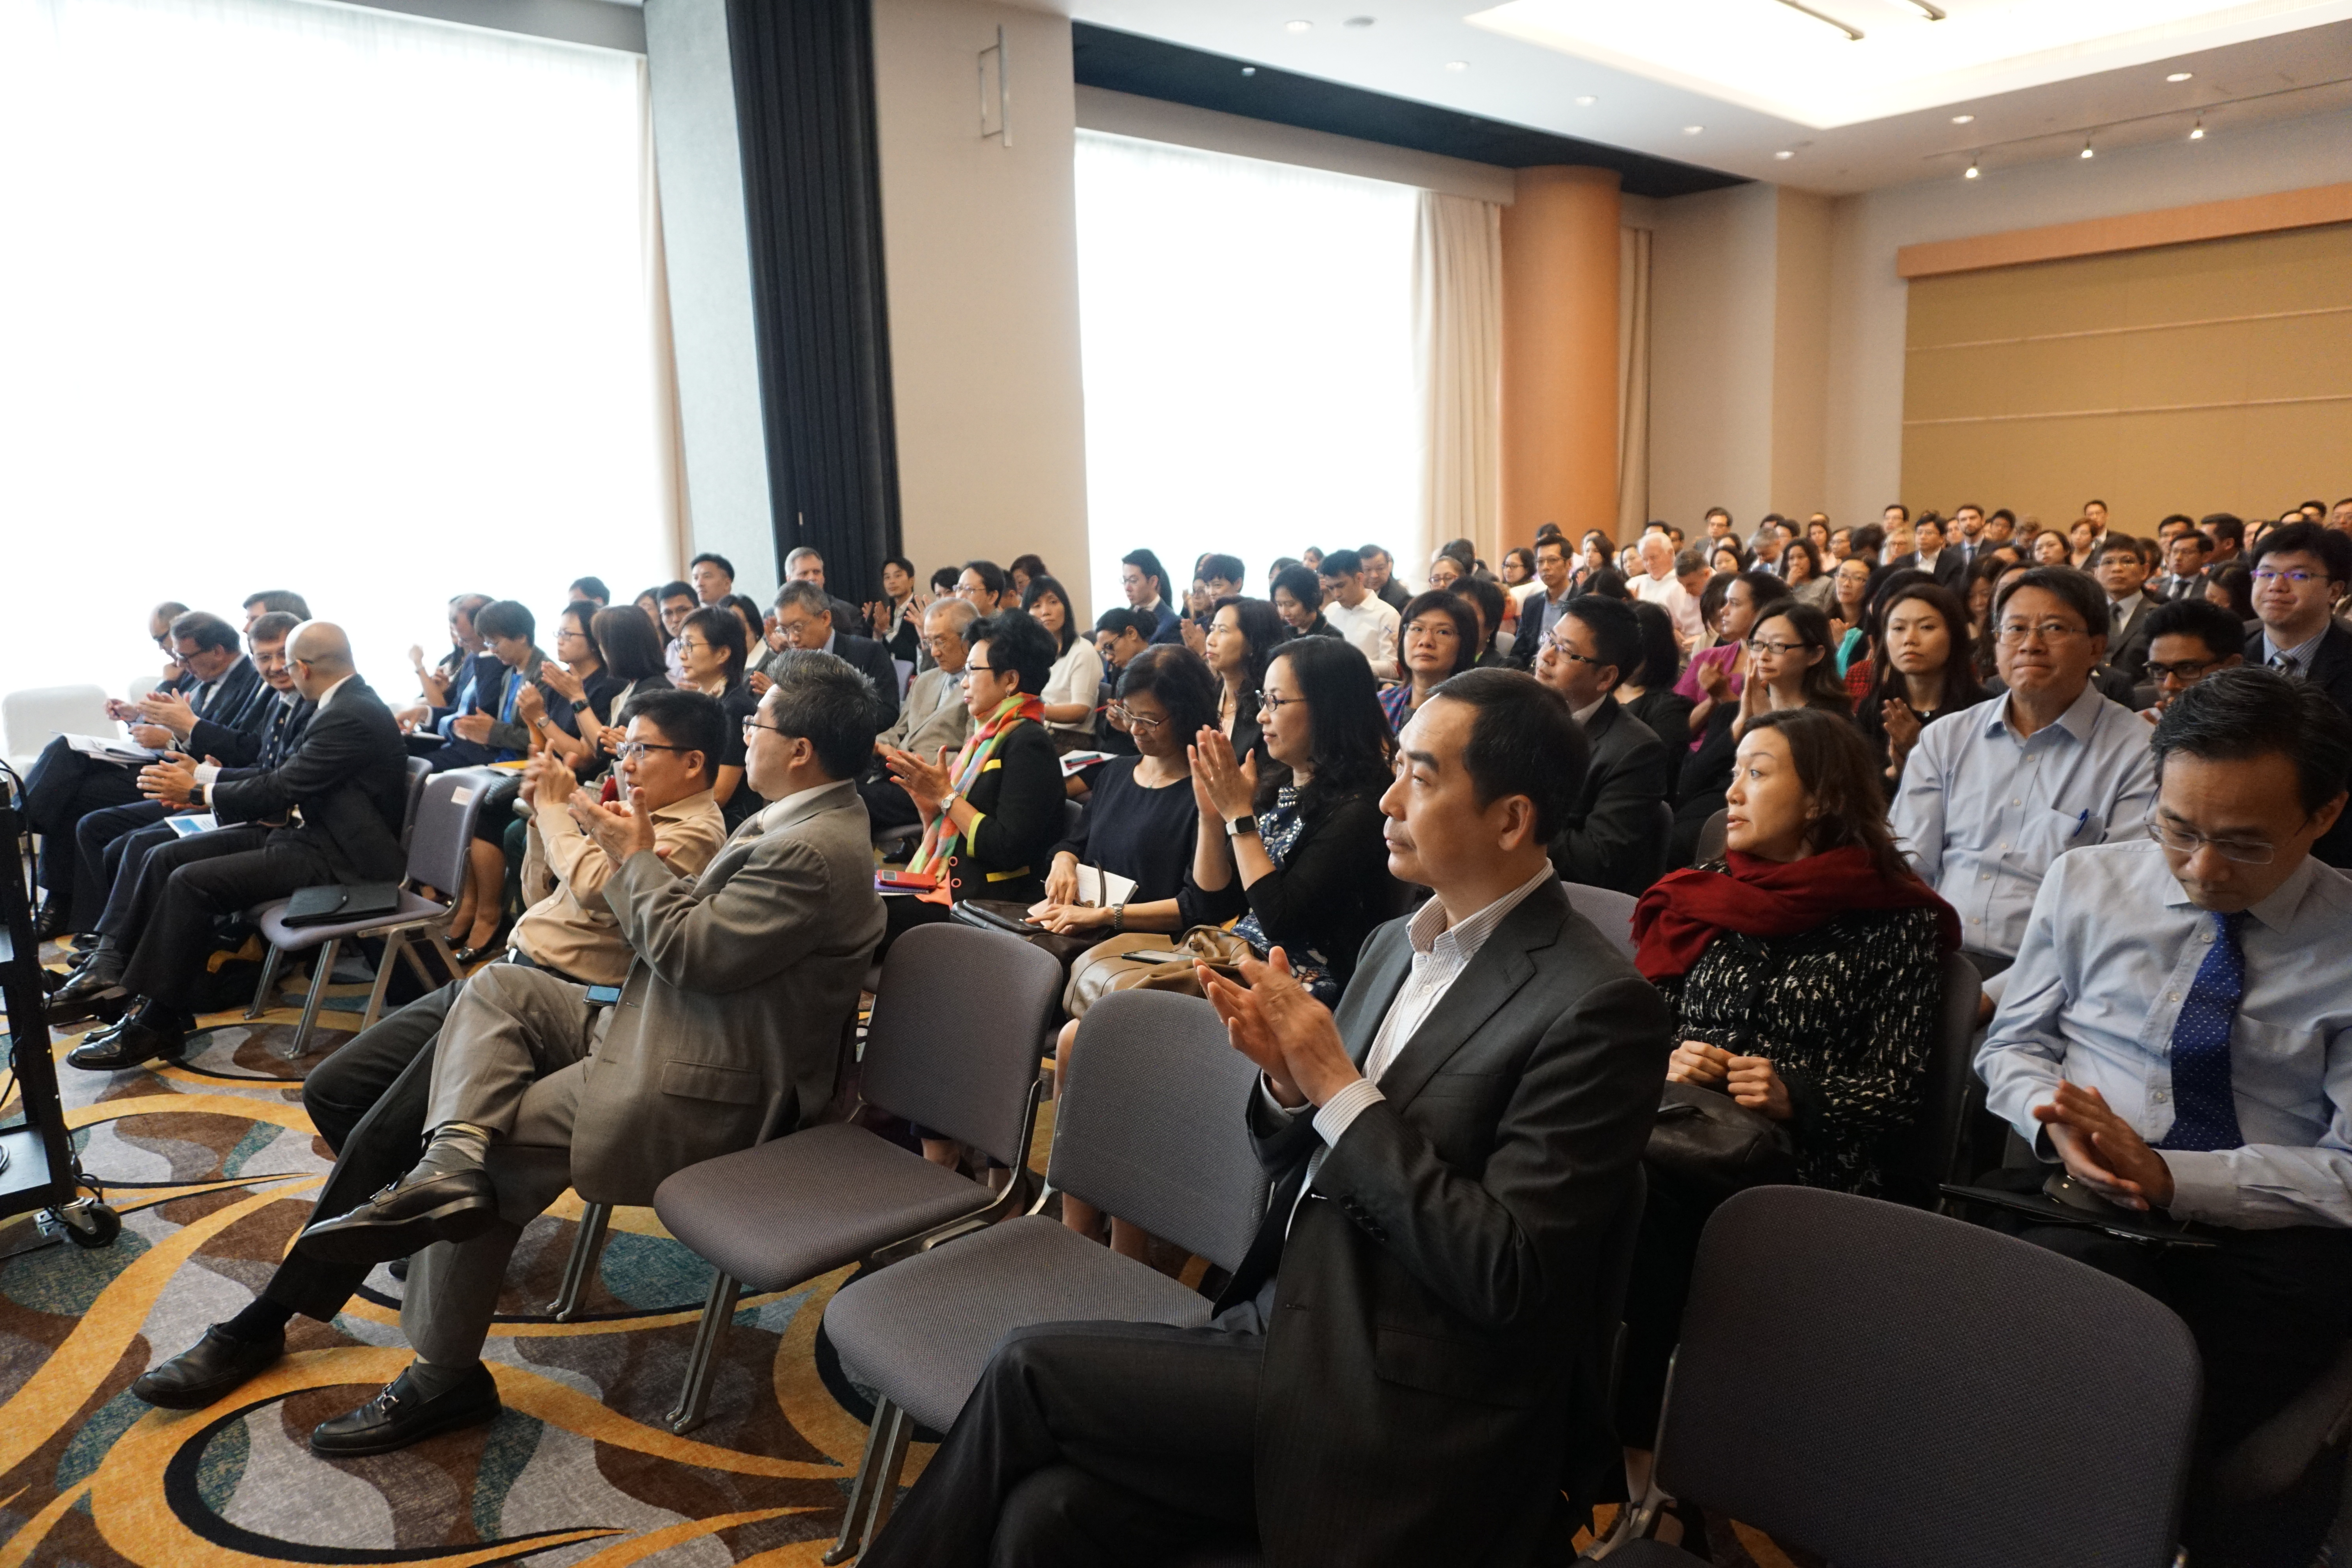 Seminar on the English Insurance Act 2015 and how this may impact on the Insurance Industry in Hong Kong